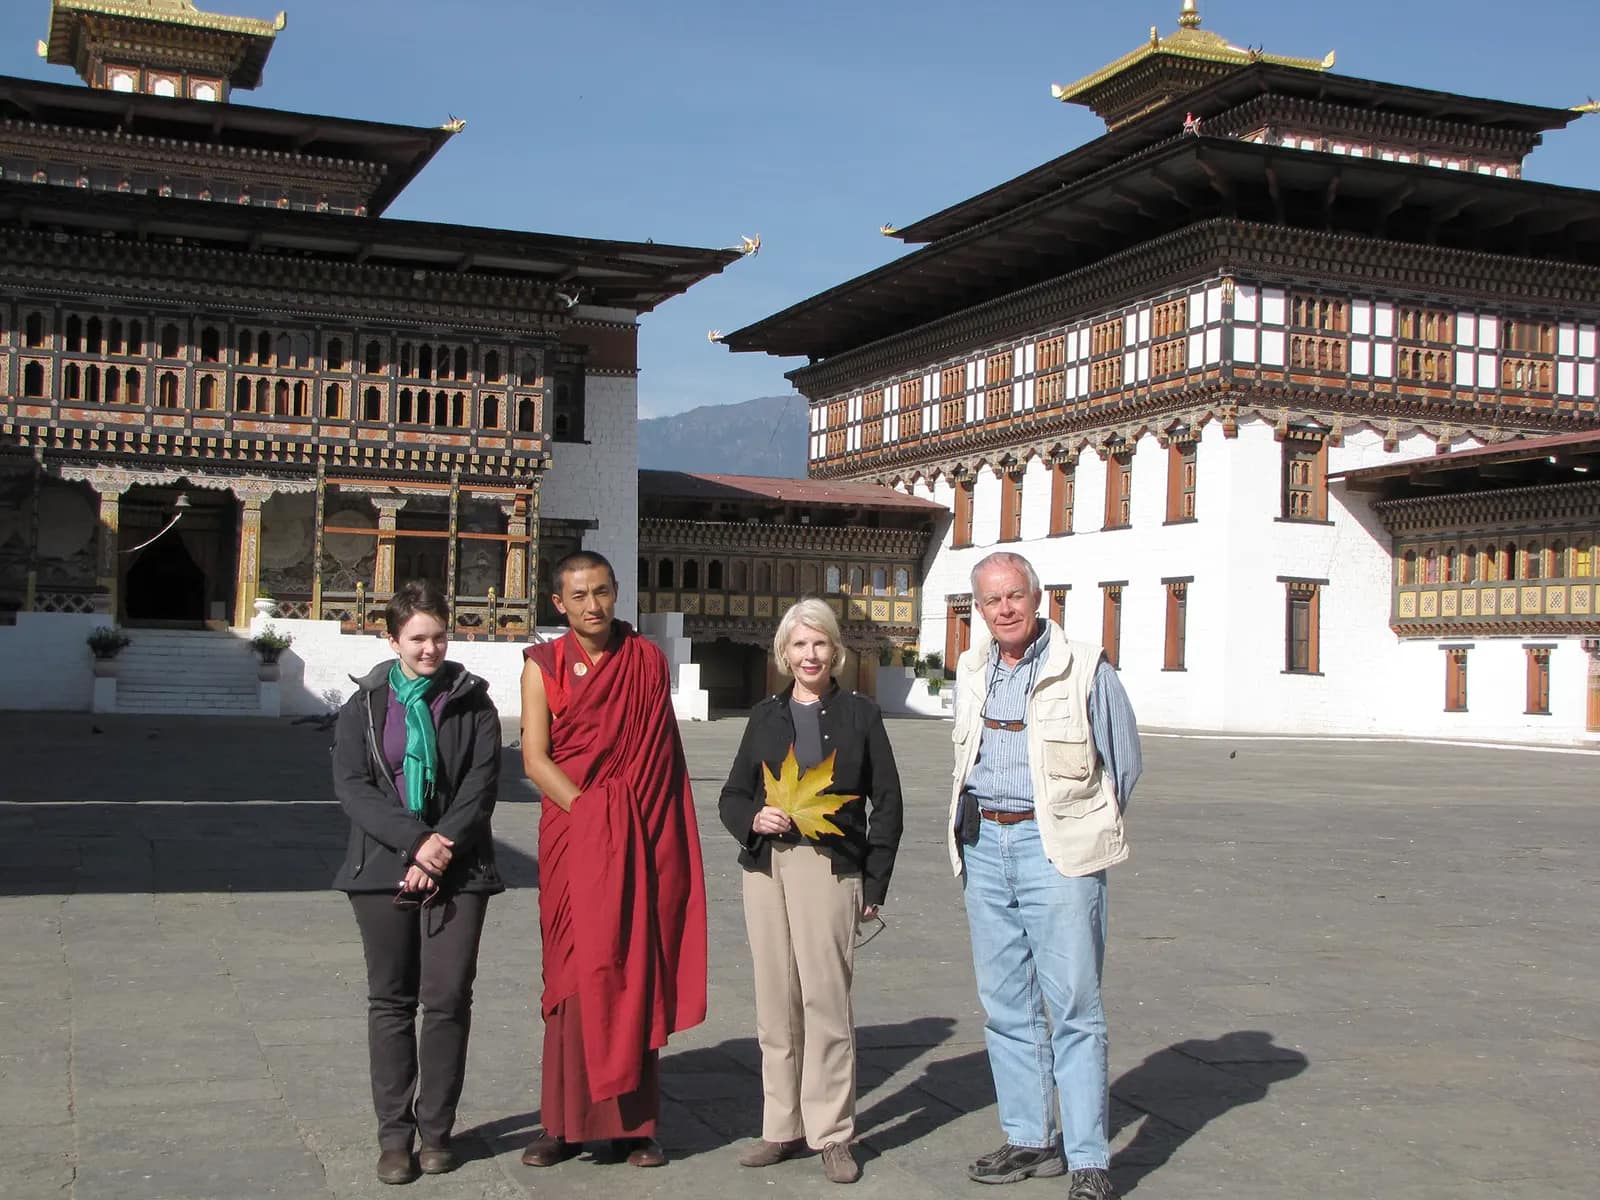 A visit to the dzong